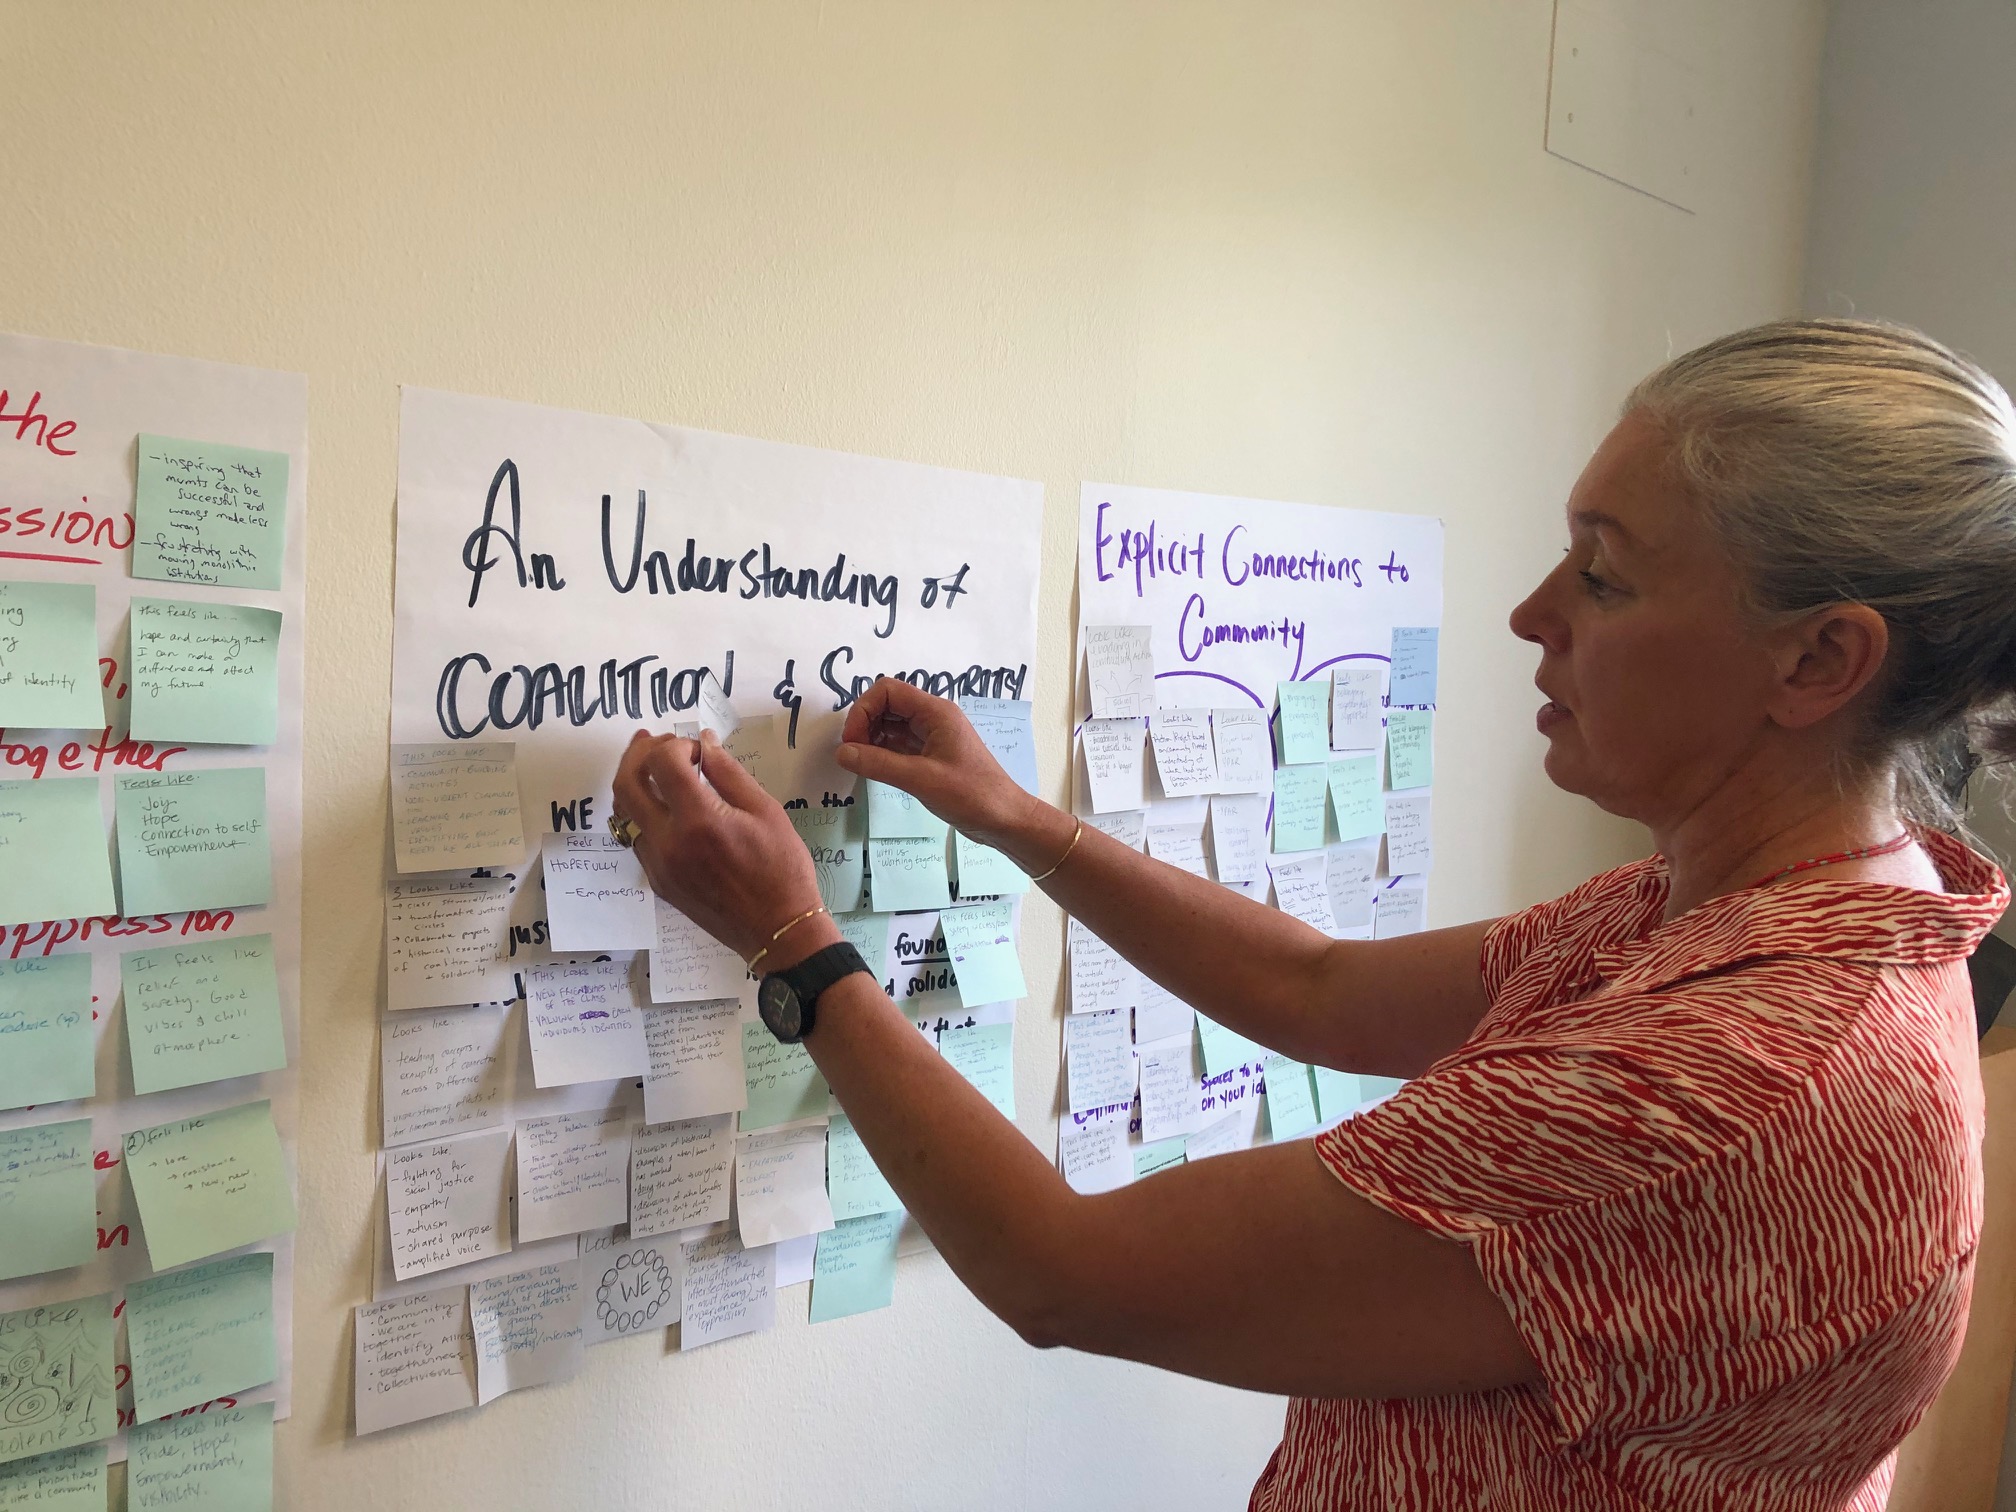 White woman putting sticky notes on a board that says An Understanding of Coalition